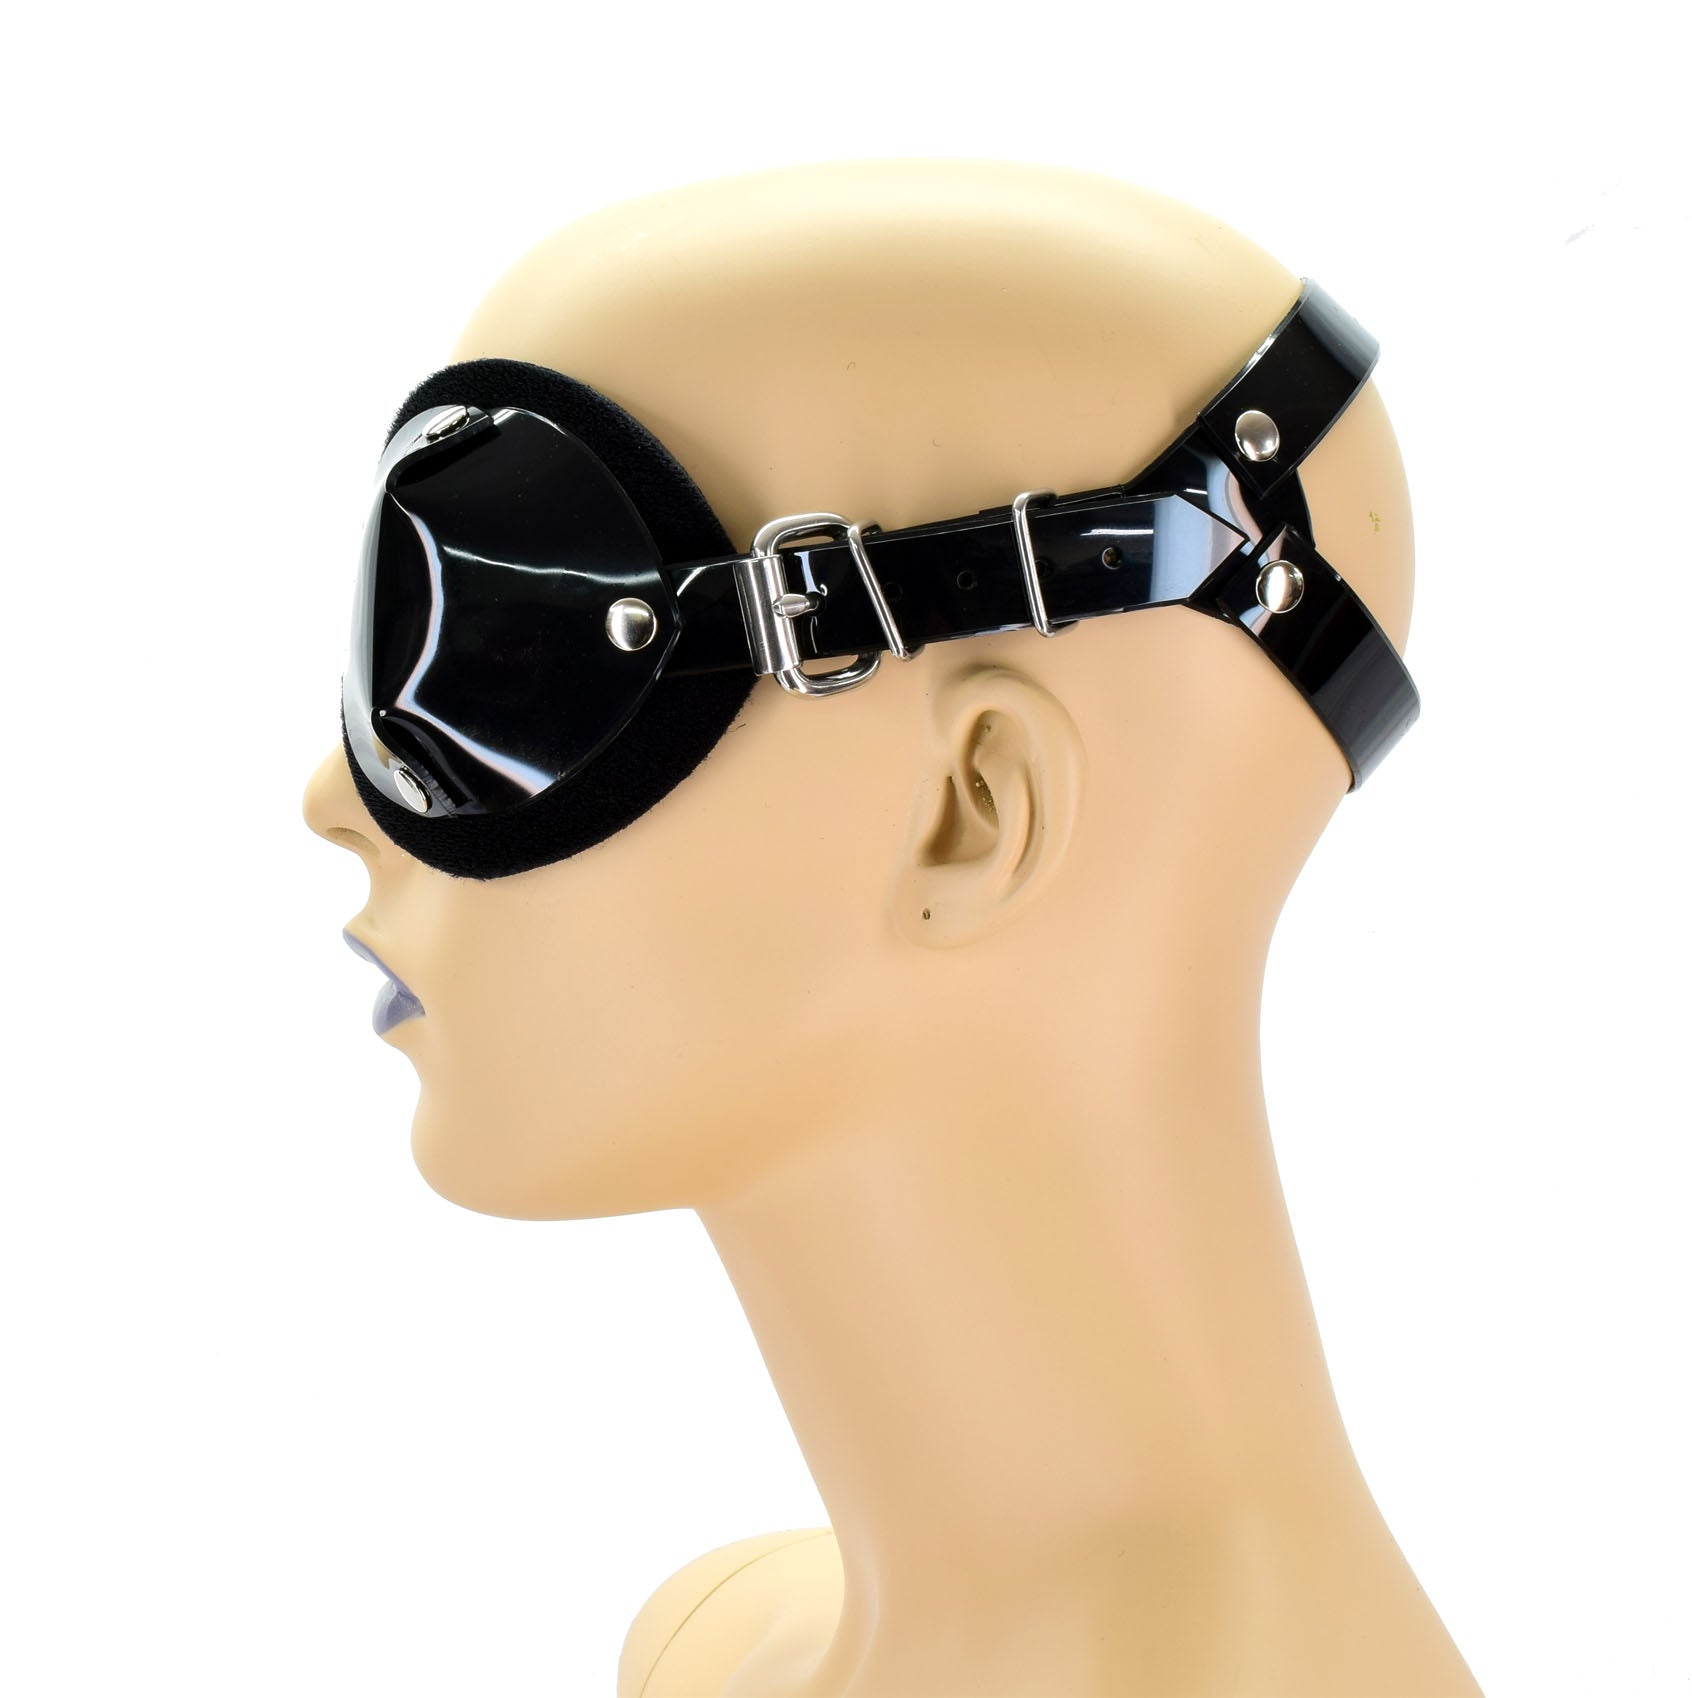 The PVC Ultimate Blindfold on a mannequin head, left side view.